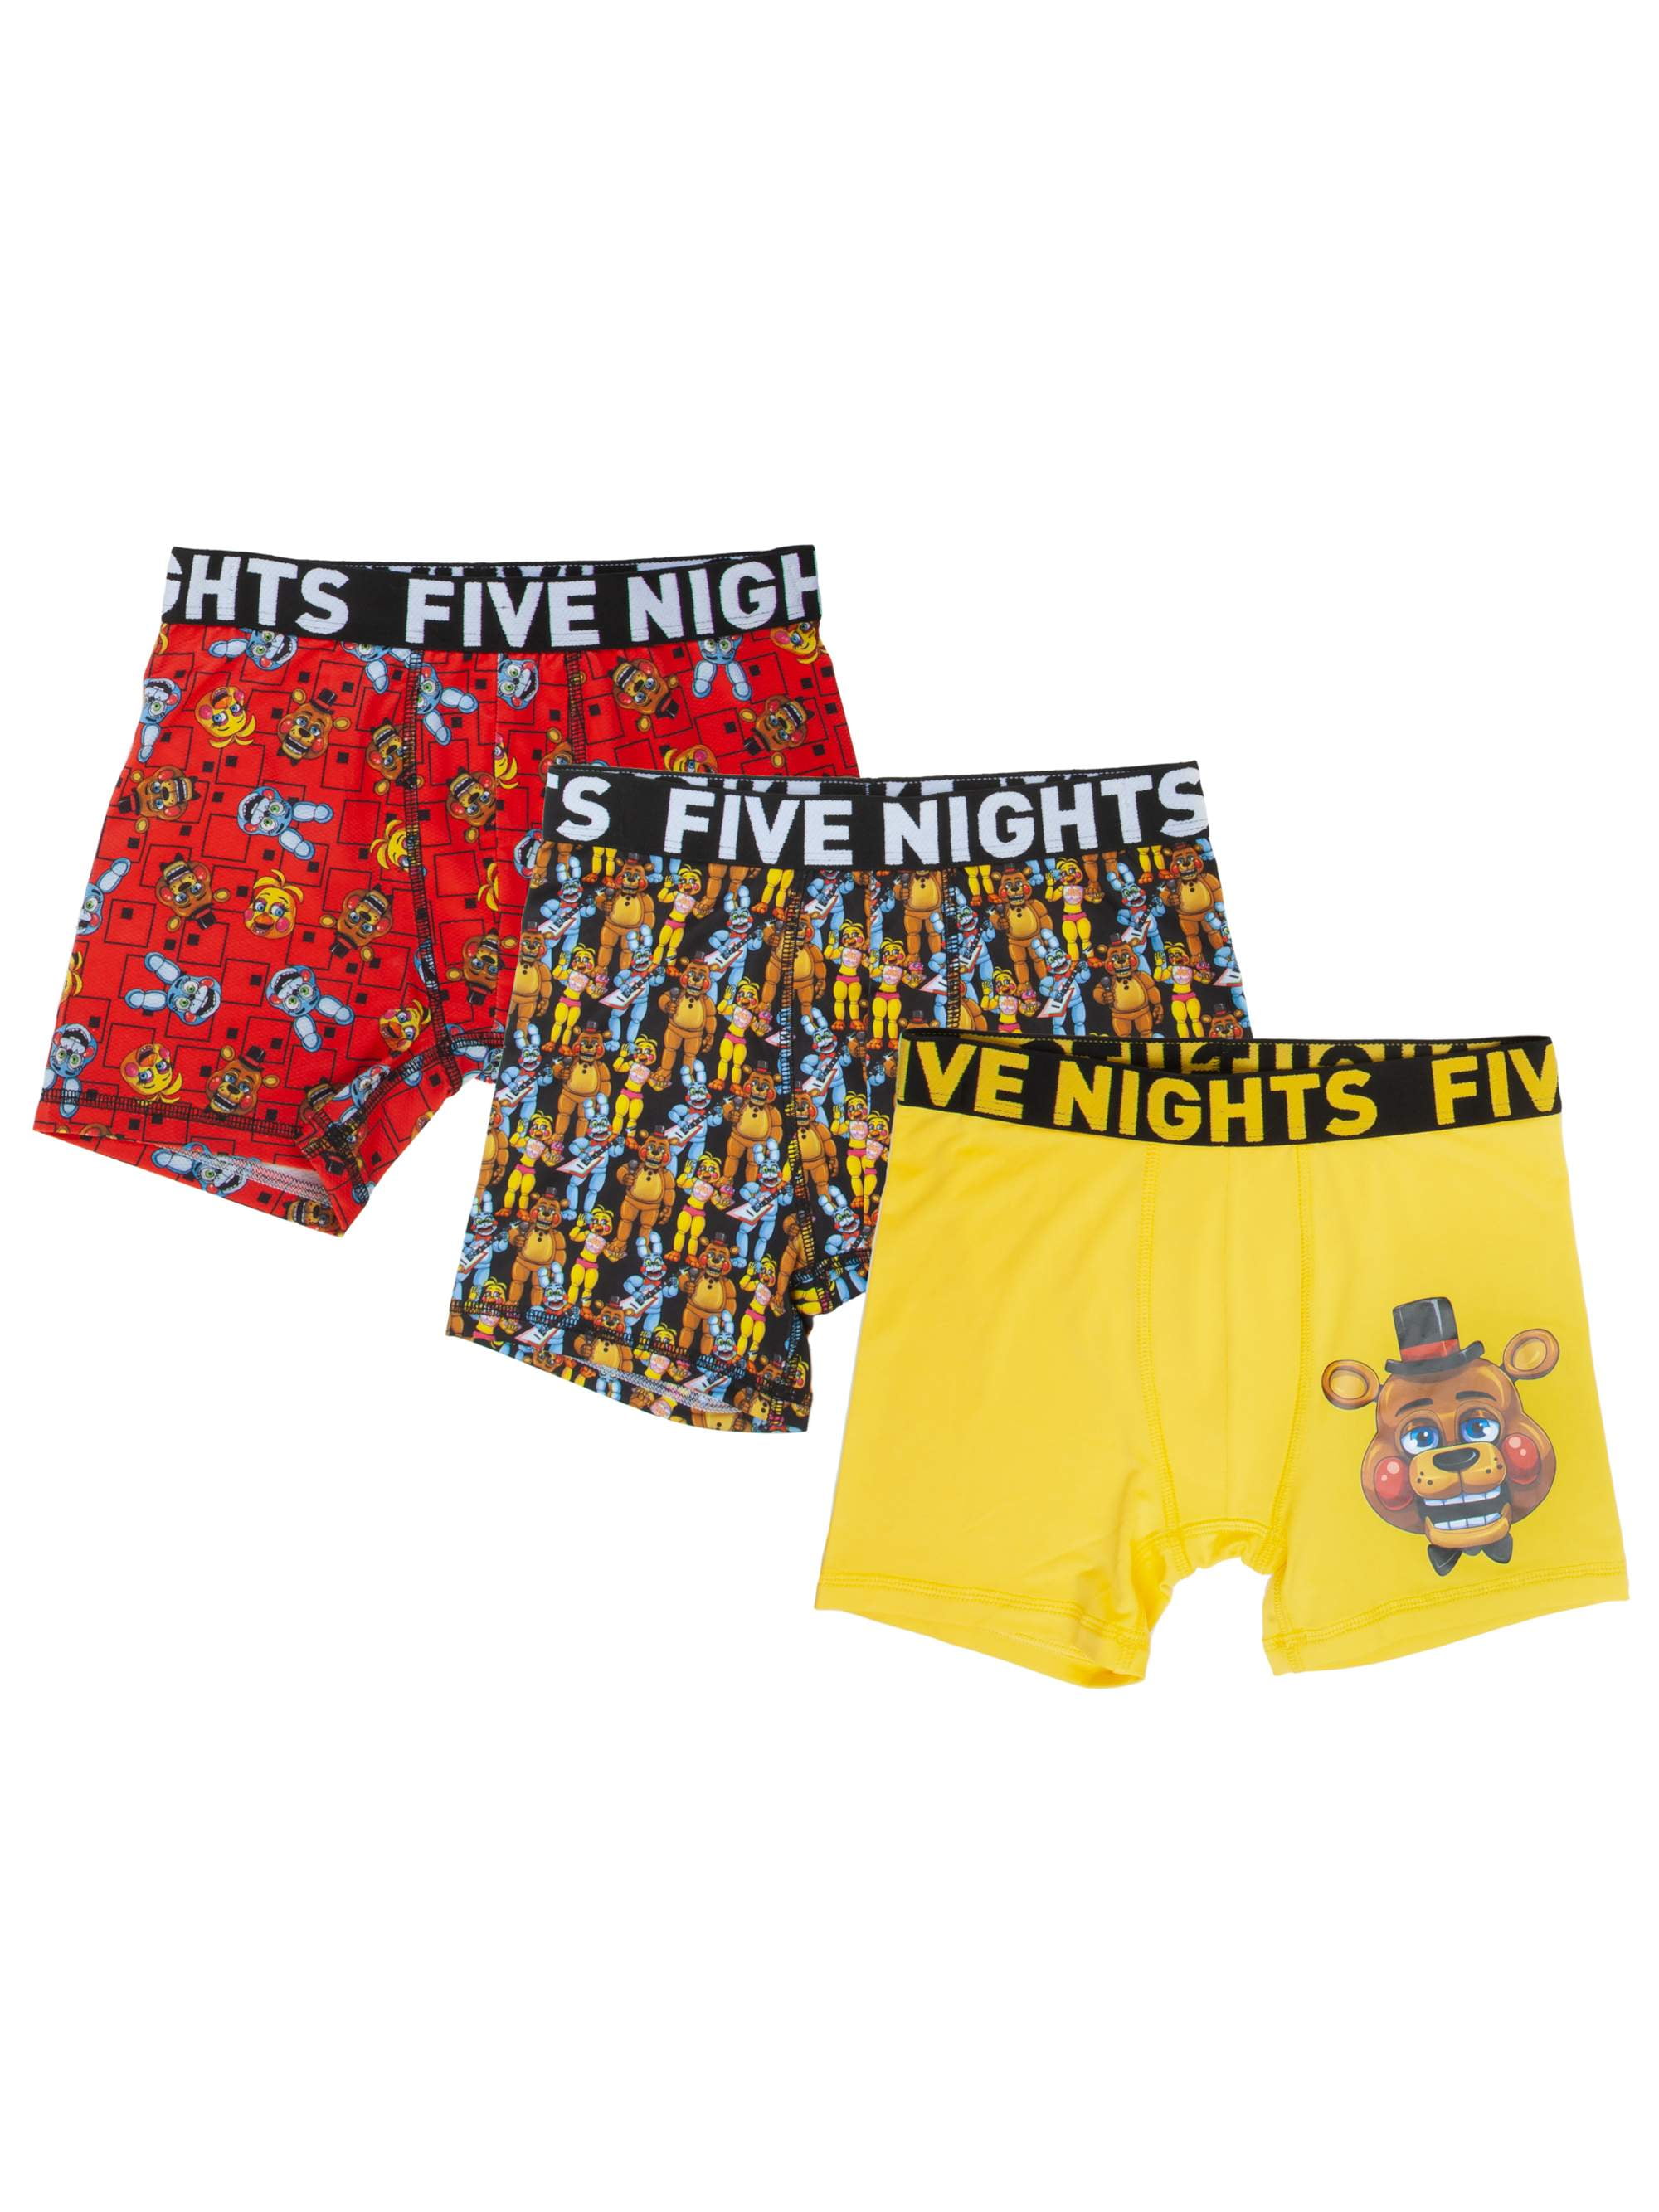 Hot Topic Five Nights At Freddy's Boxer Briefs 